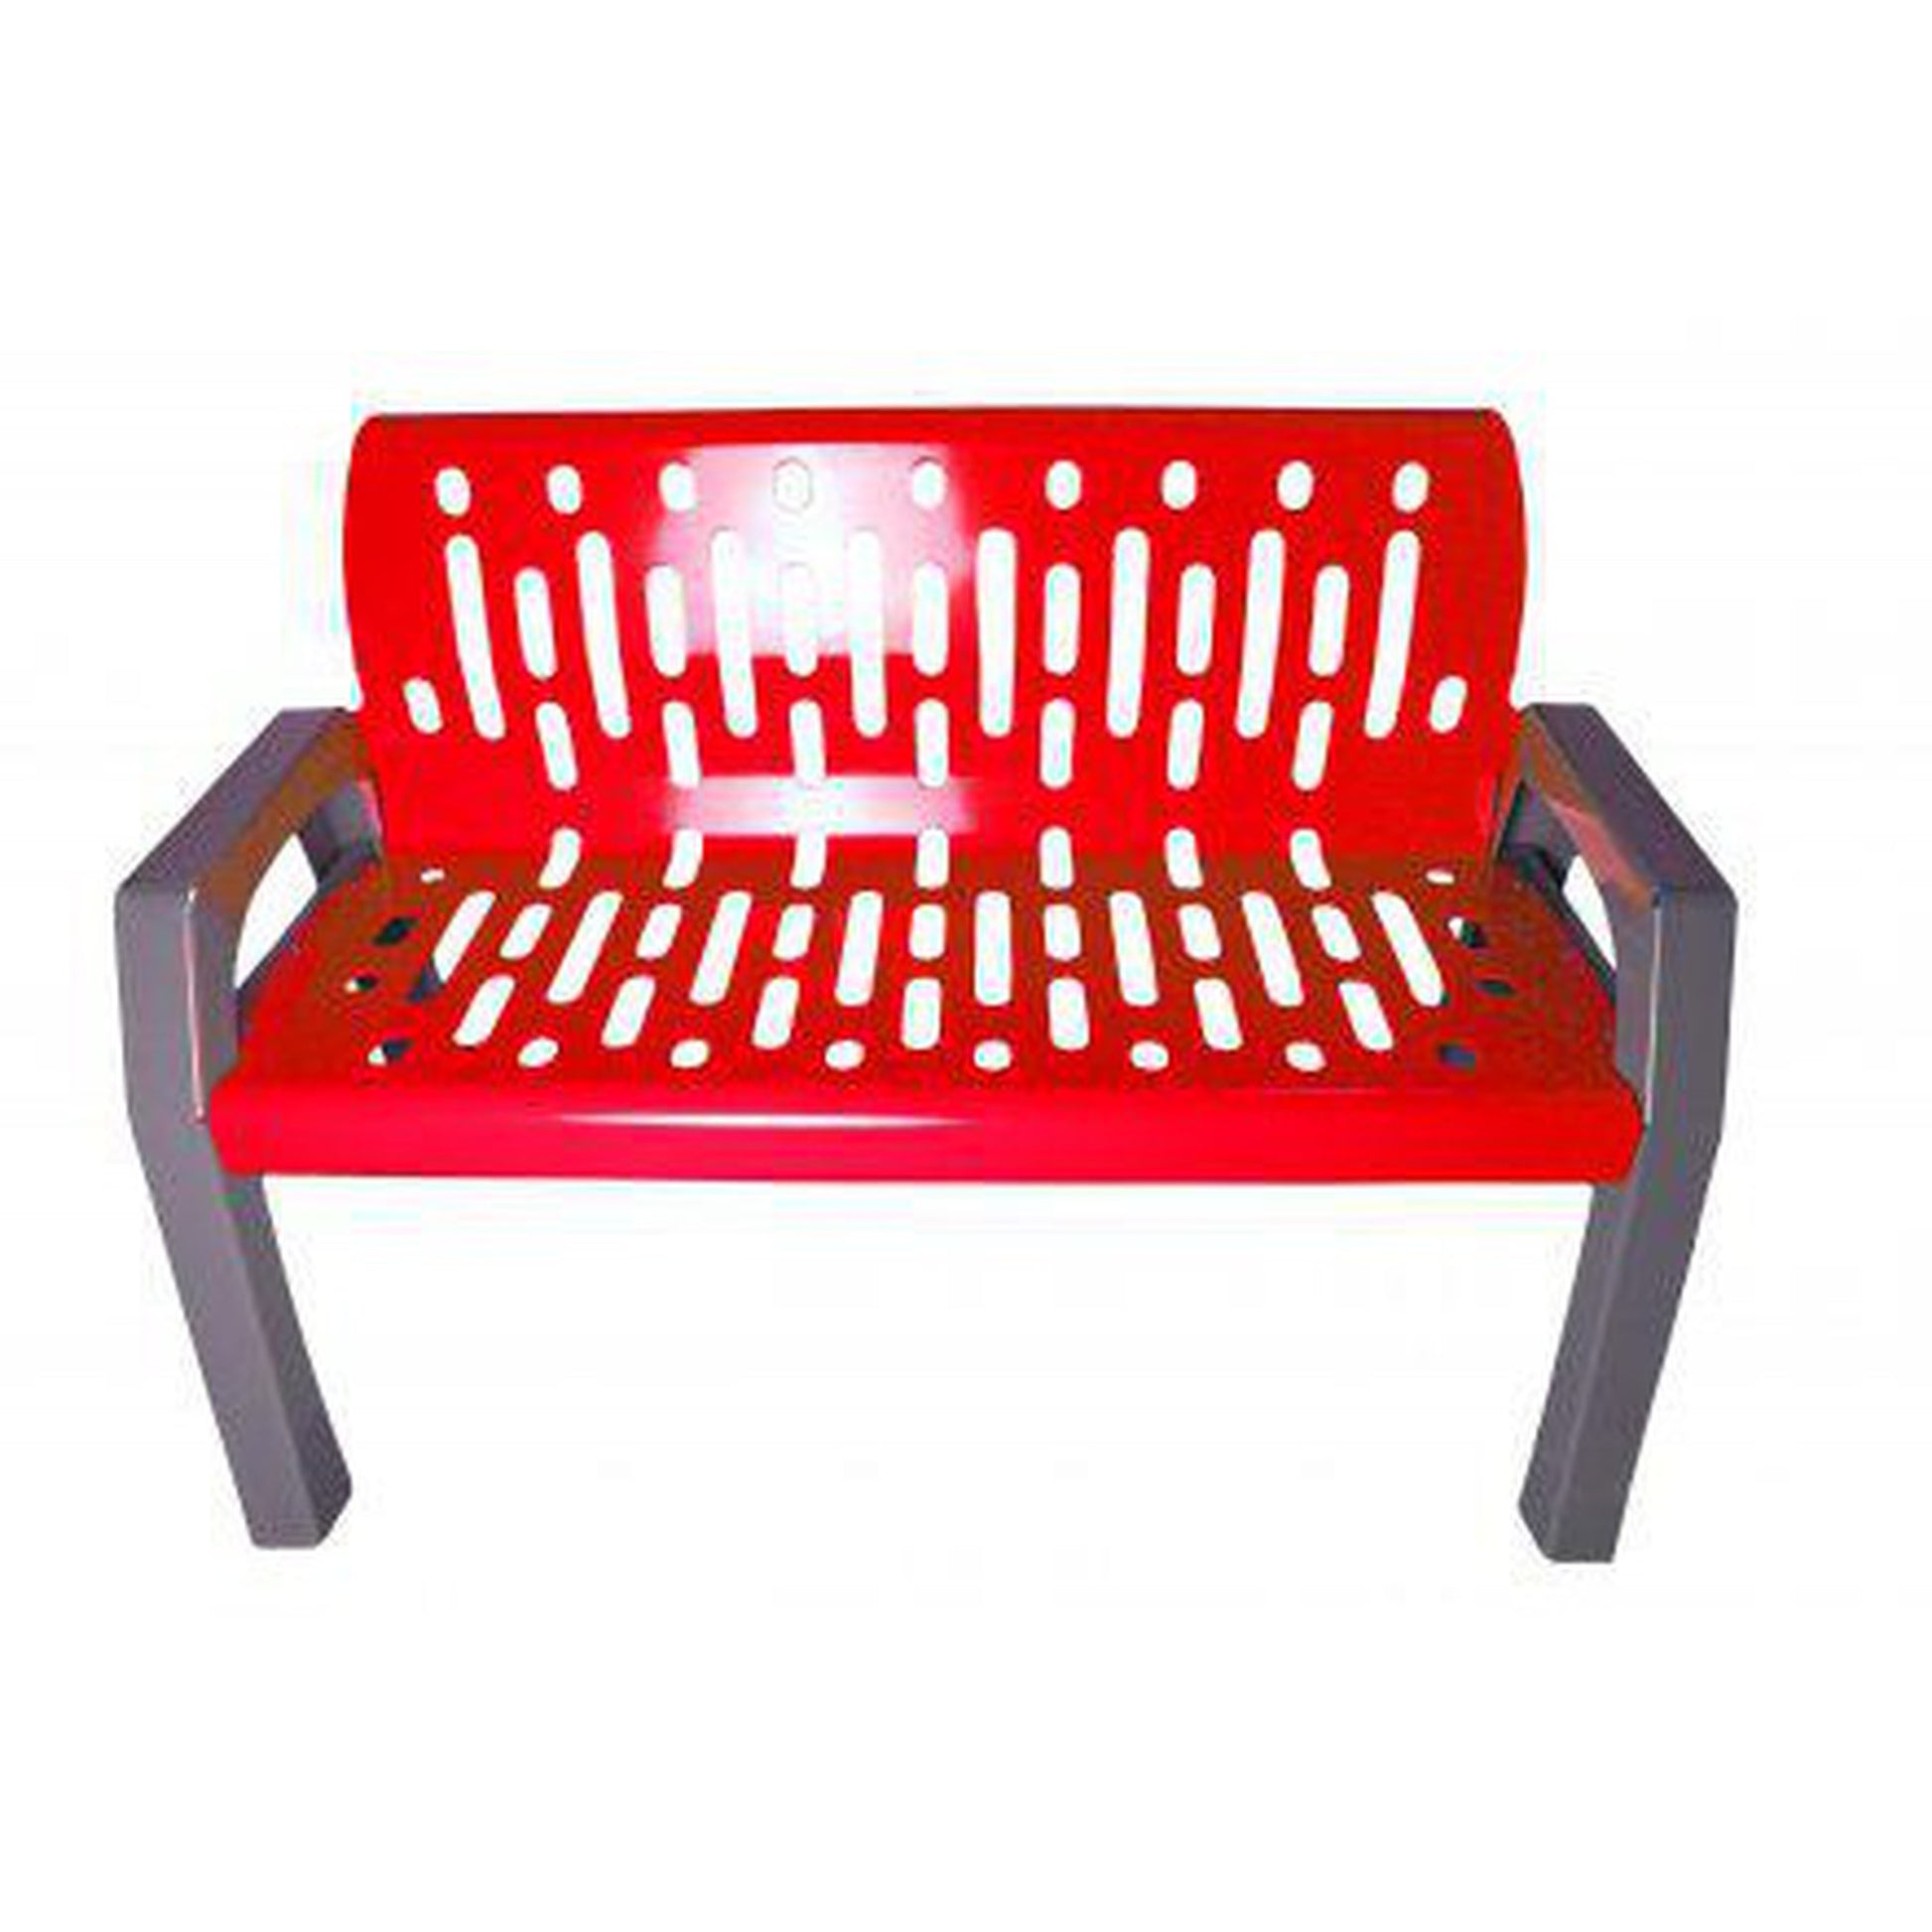 Frost 50.4 x 25.3 x 34.3 Red Site Furnishings